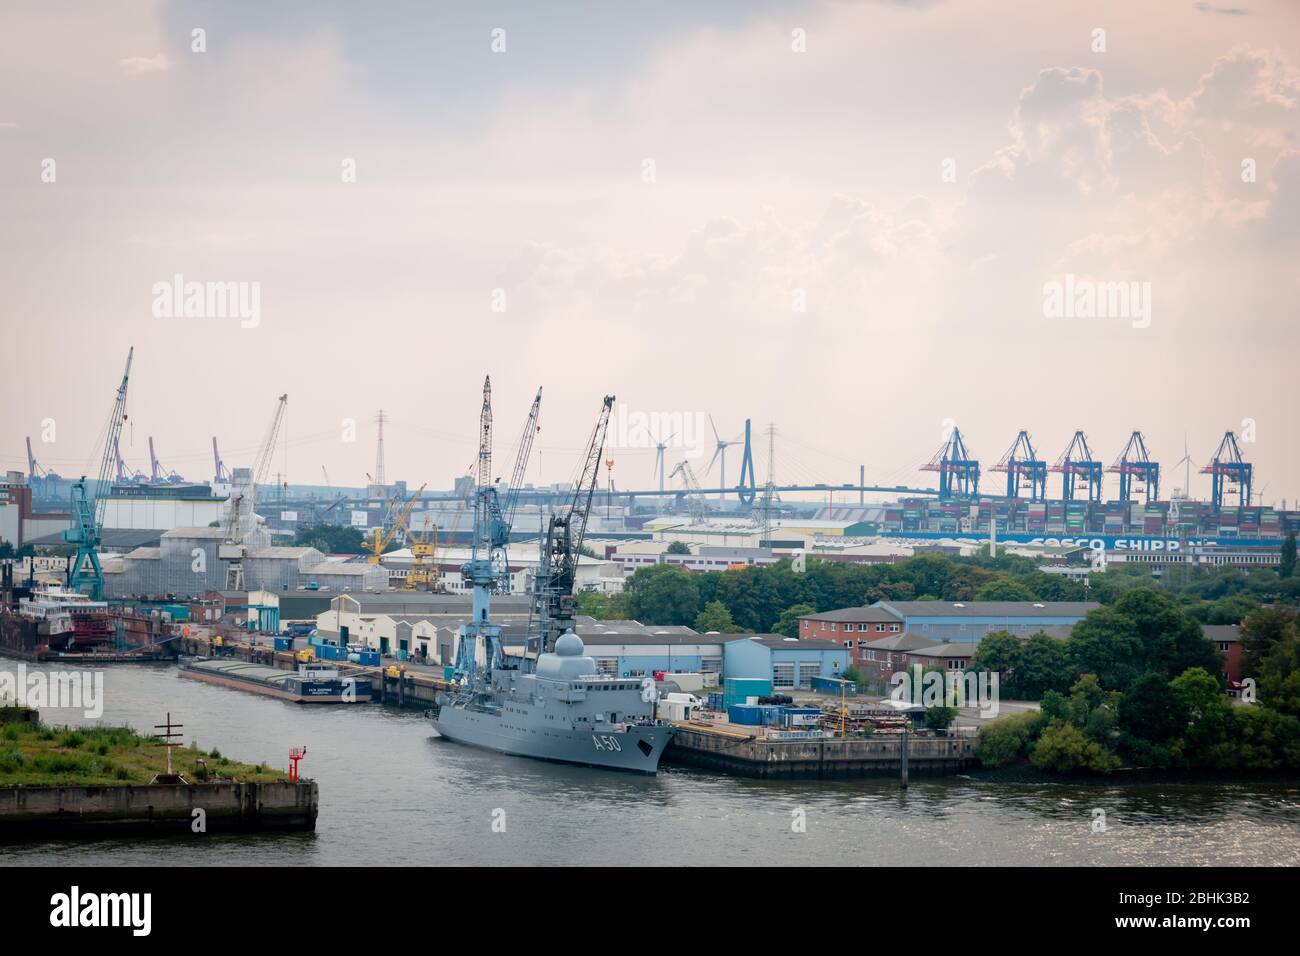 The Naval A50 service ship and others in the landscape of the Port of Hamburg and vicinity Stock Photo